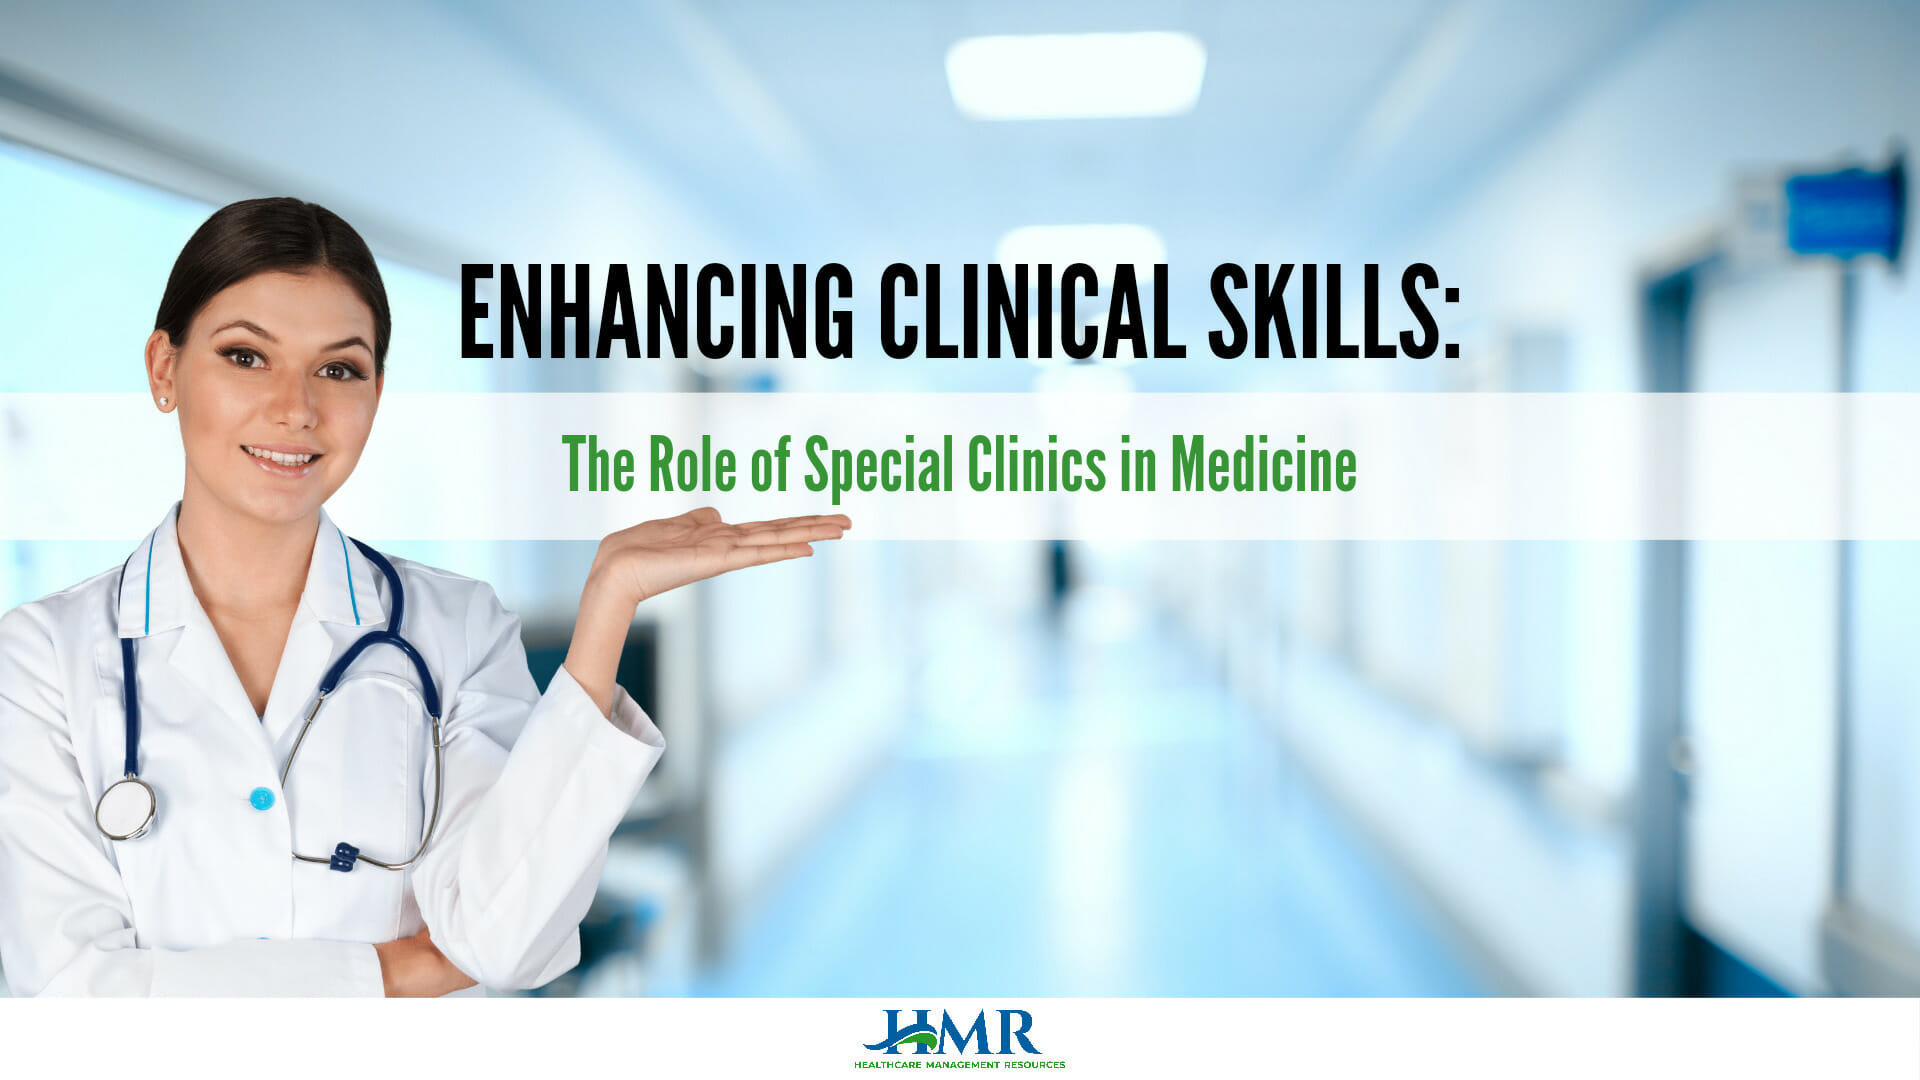 The Role of Special Clinics in Medicine